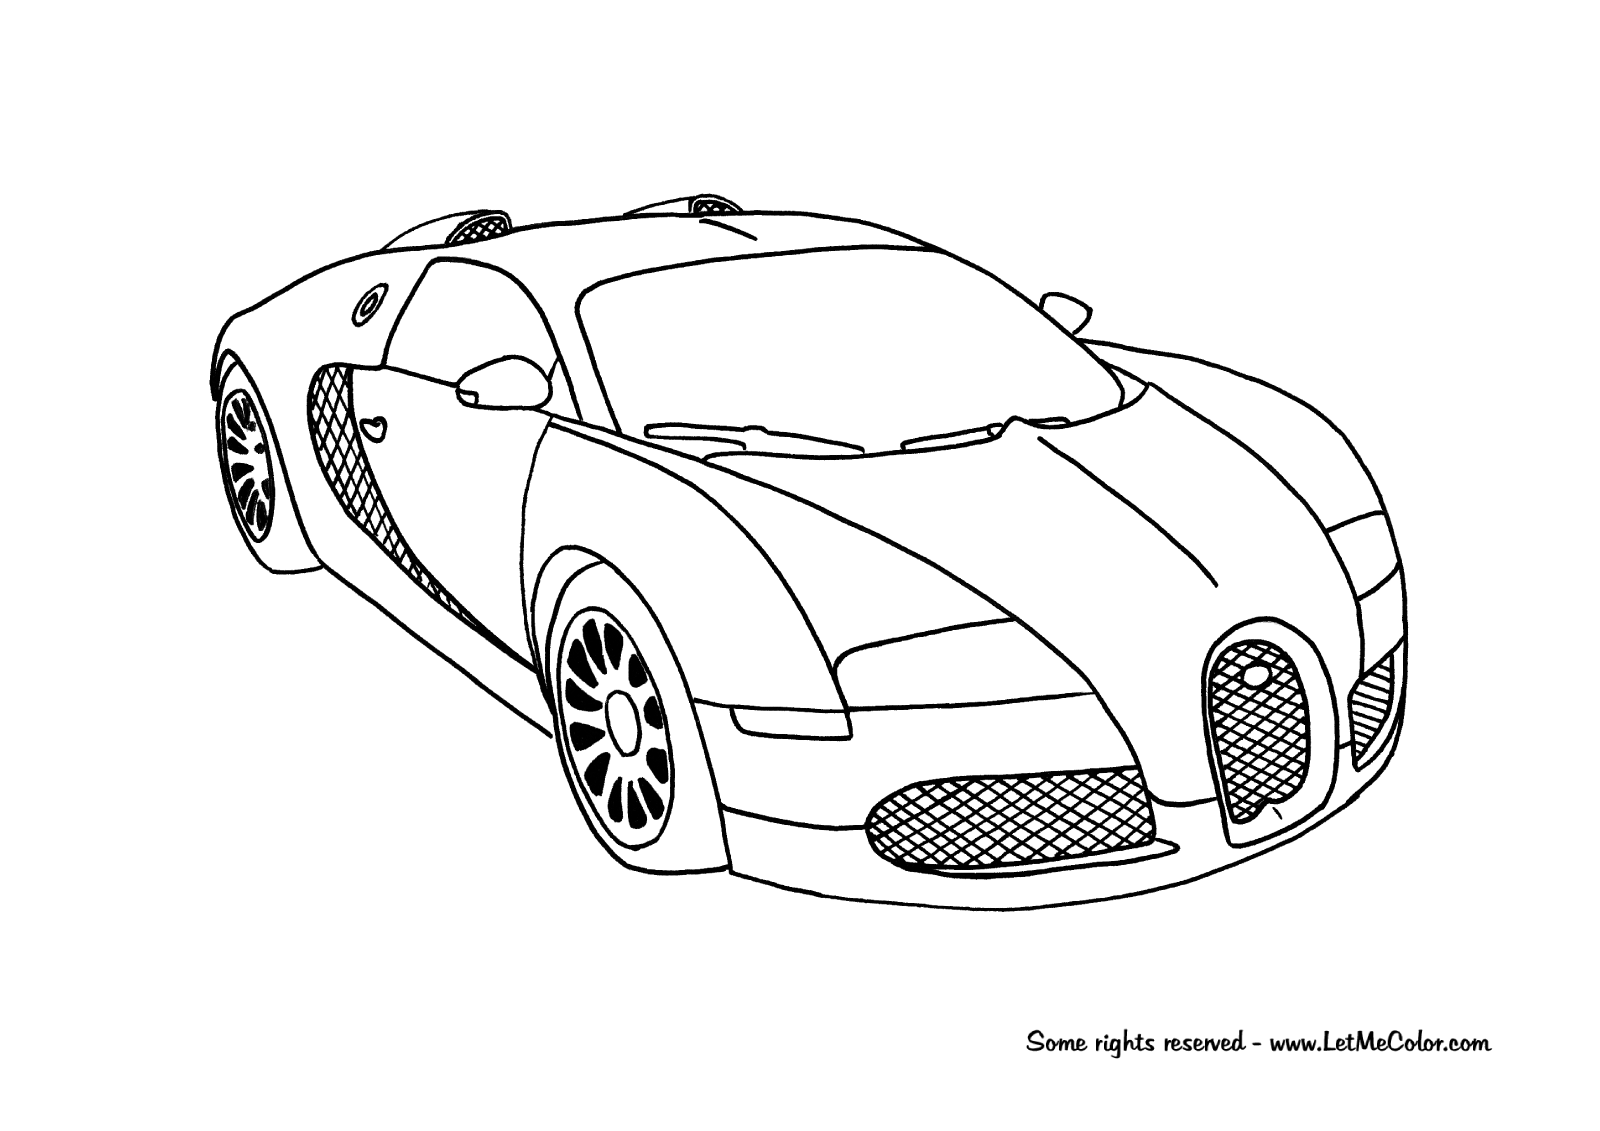 6200 Top Coloring Pages Cars Bugatti Download Free Images